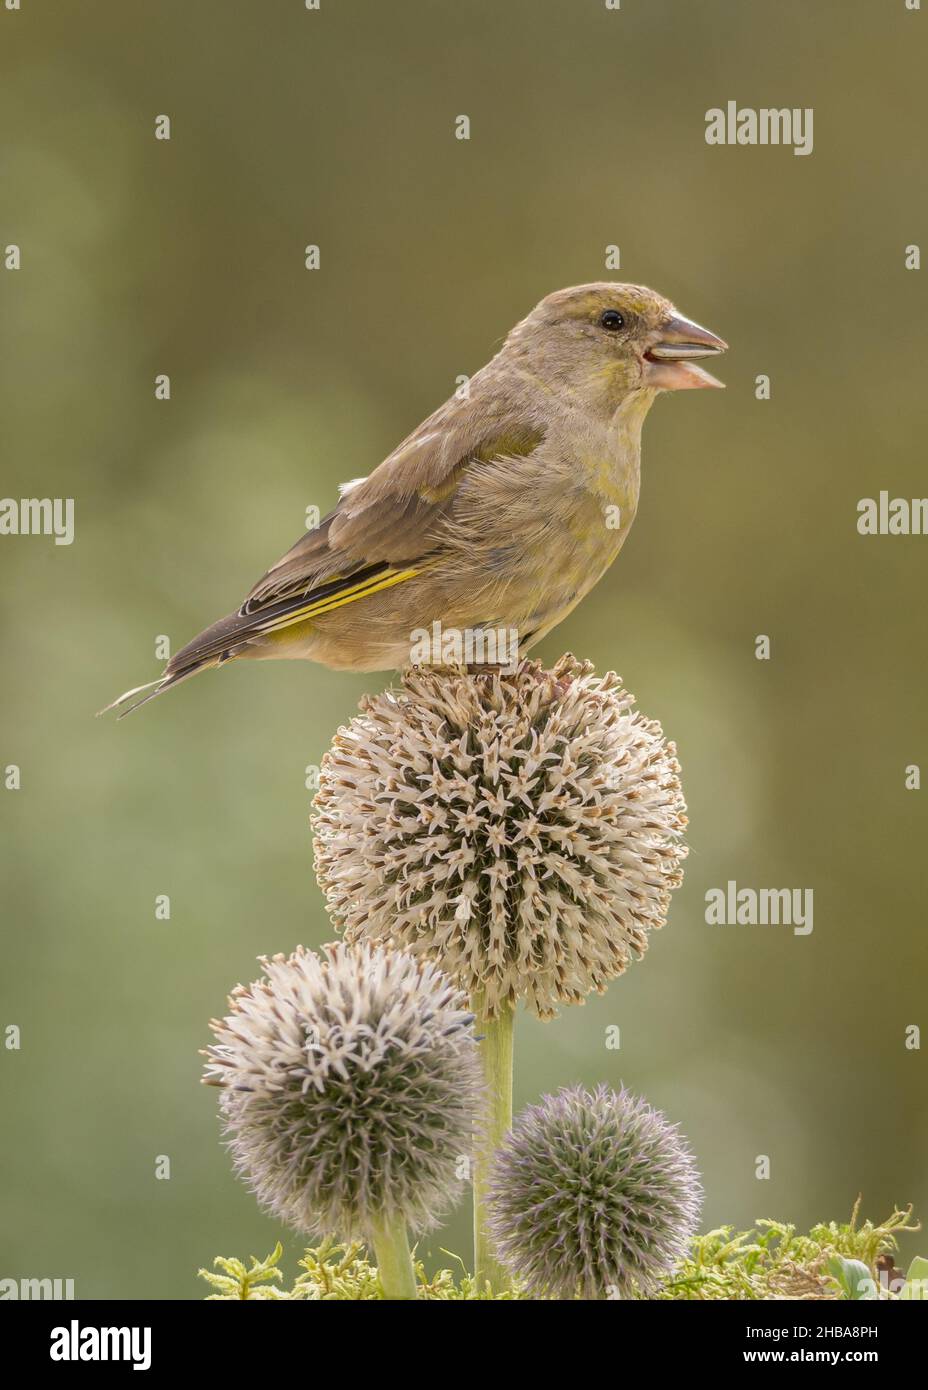 greenfinch is standing on a flower with a seed in mouth Stock Photo